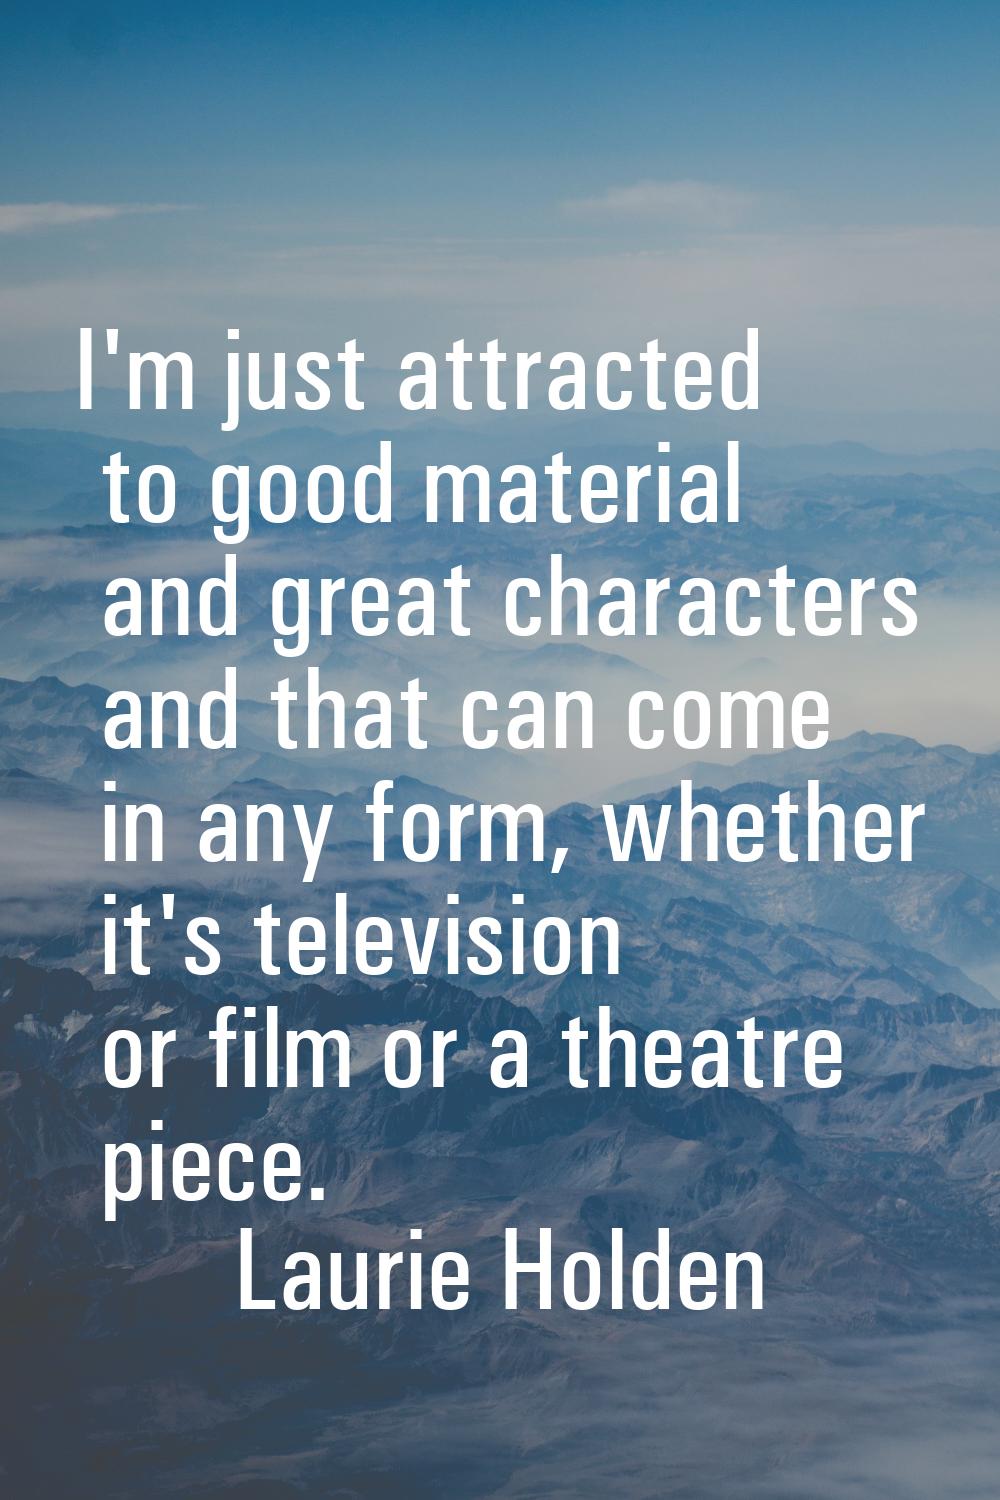 I'm just attracted to good material and great characters and that can come in any form, whether it'